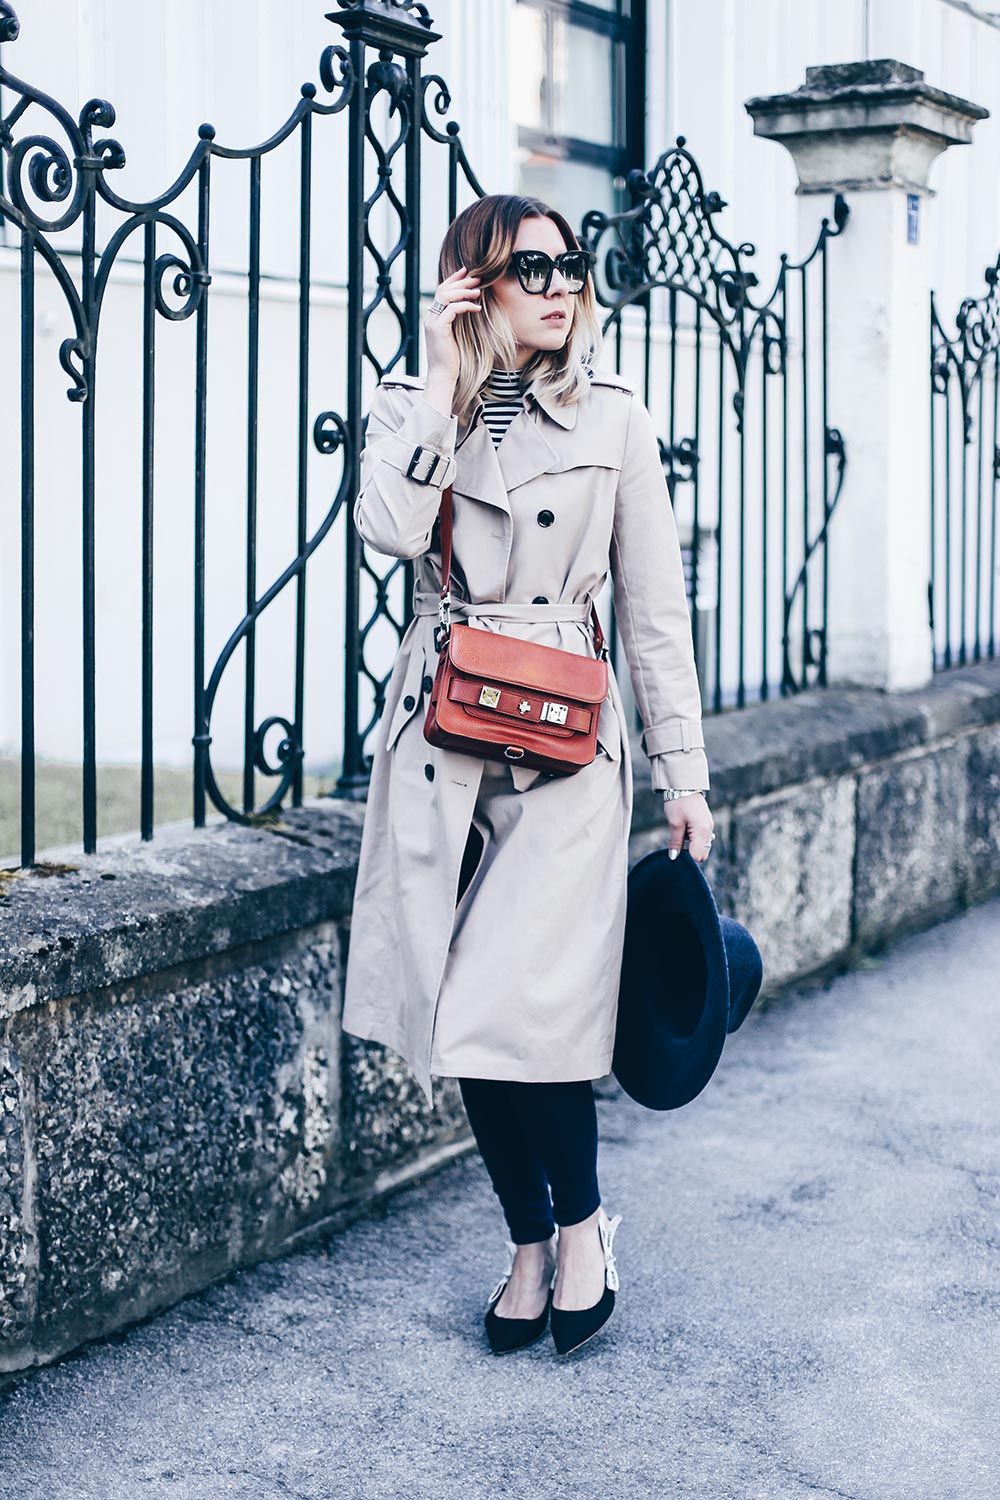 casual chic style und outfit mit J'Adior Pumps, Proenza Schouler PS11 Tasche, Trenchcoat und Skinny Jeans, Fashion Blog, Outfit Blog, Modeblog, Streetstyle 2017, www.whoismocca.com